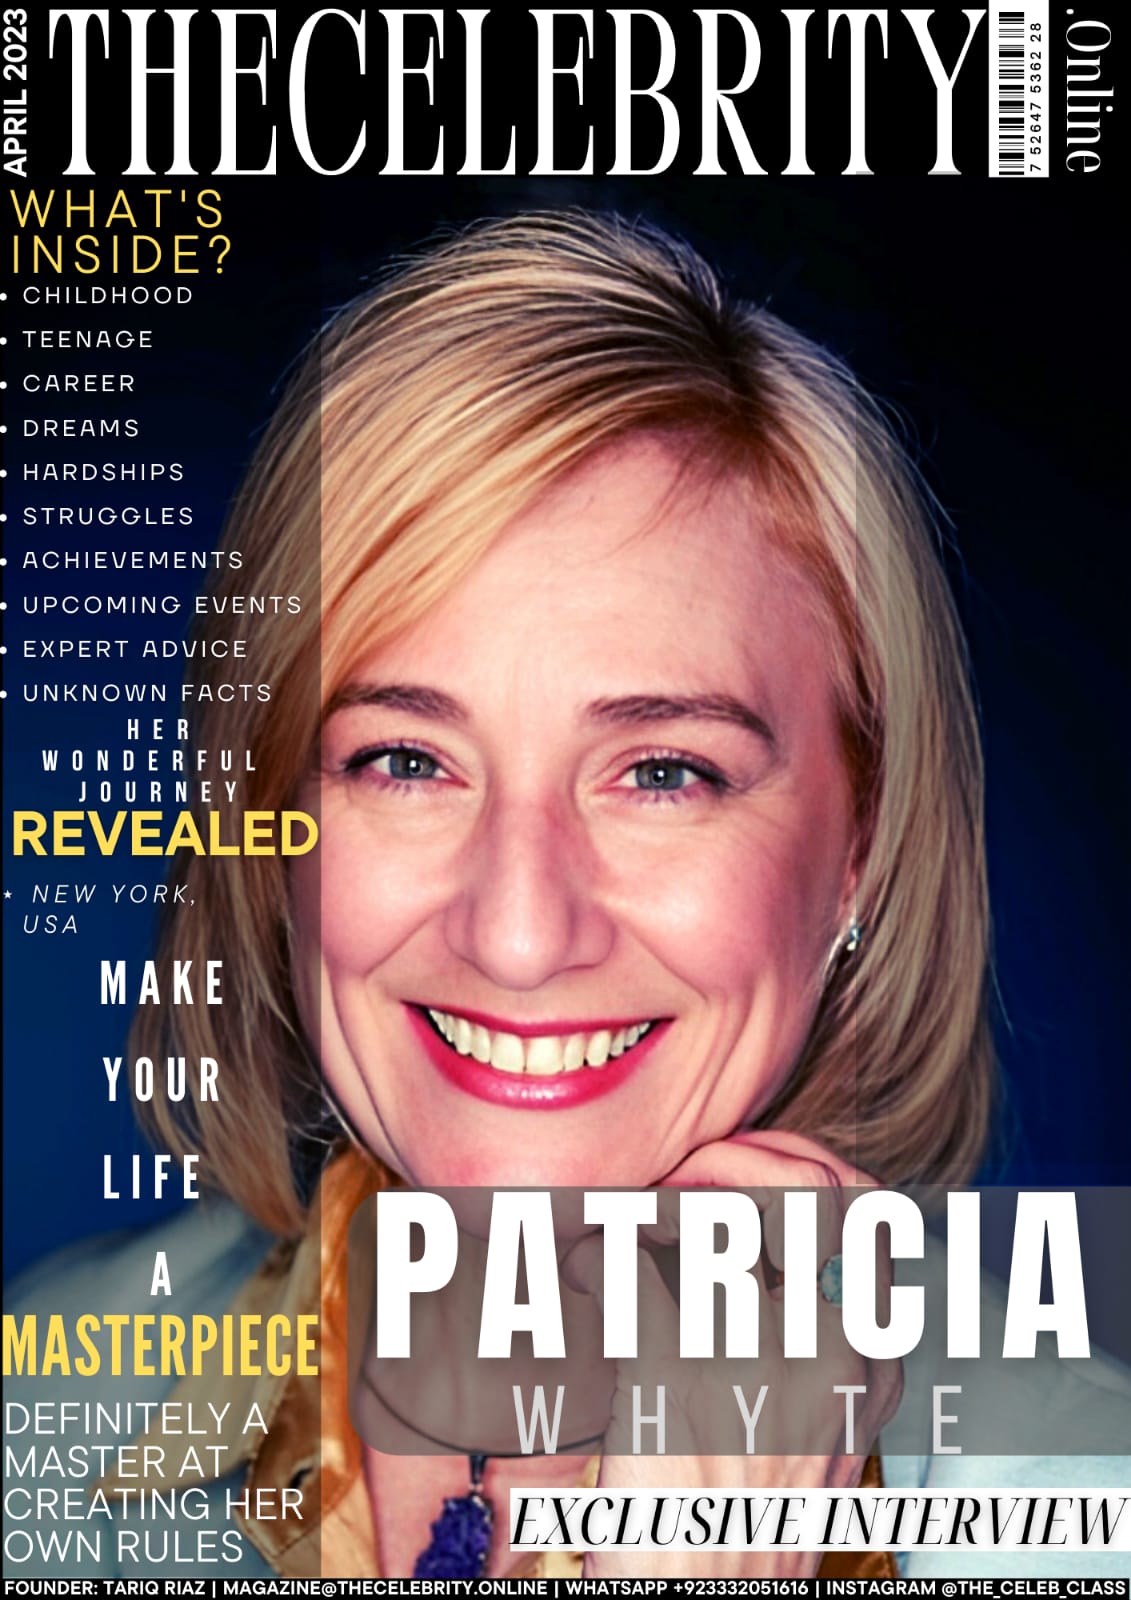 Patricia Whyte Exclusive Interview – ‘Ask for help & Act on what is offered’